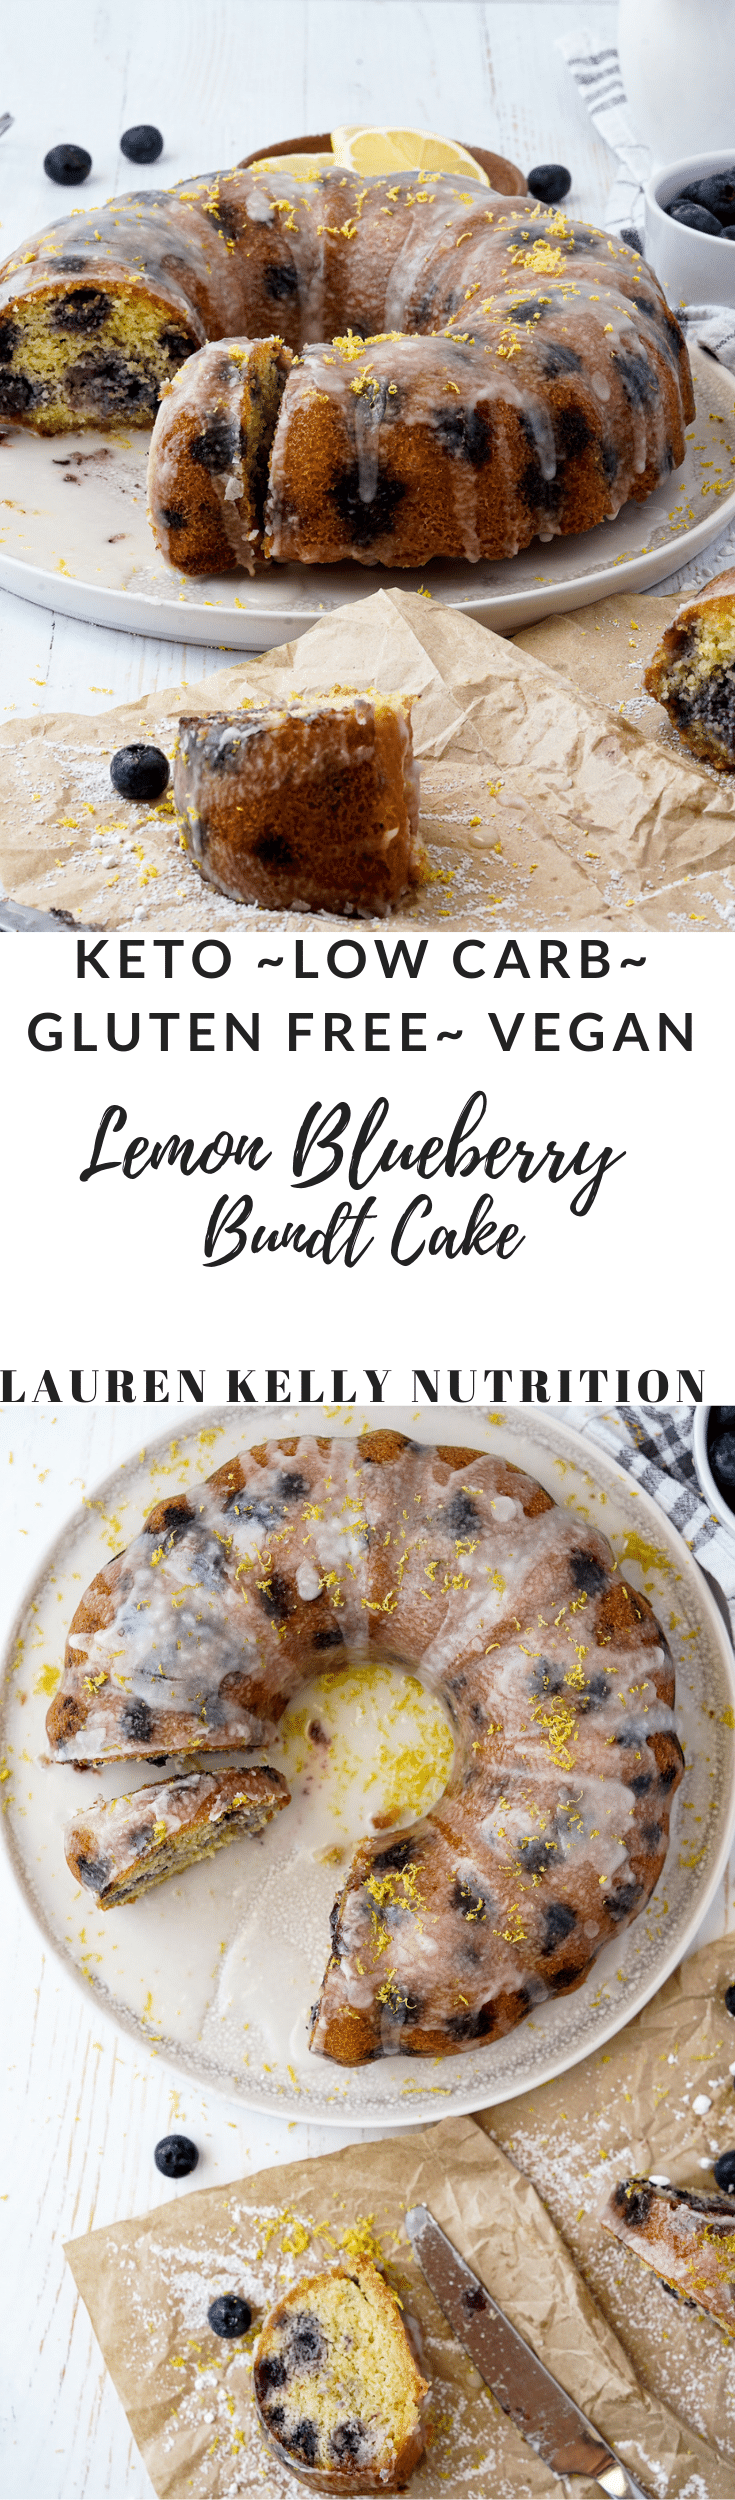 ender lemon blueberry cake with a wonderfully light lemon glaze, everyone will absolutely love this gorgeous, healthy dessert. This Lemon Blueberry Bundt Cake is low carb, gluten free, sugar free and seriously delicious.